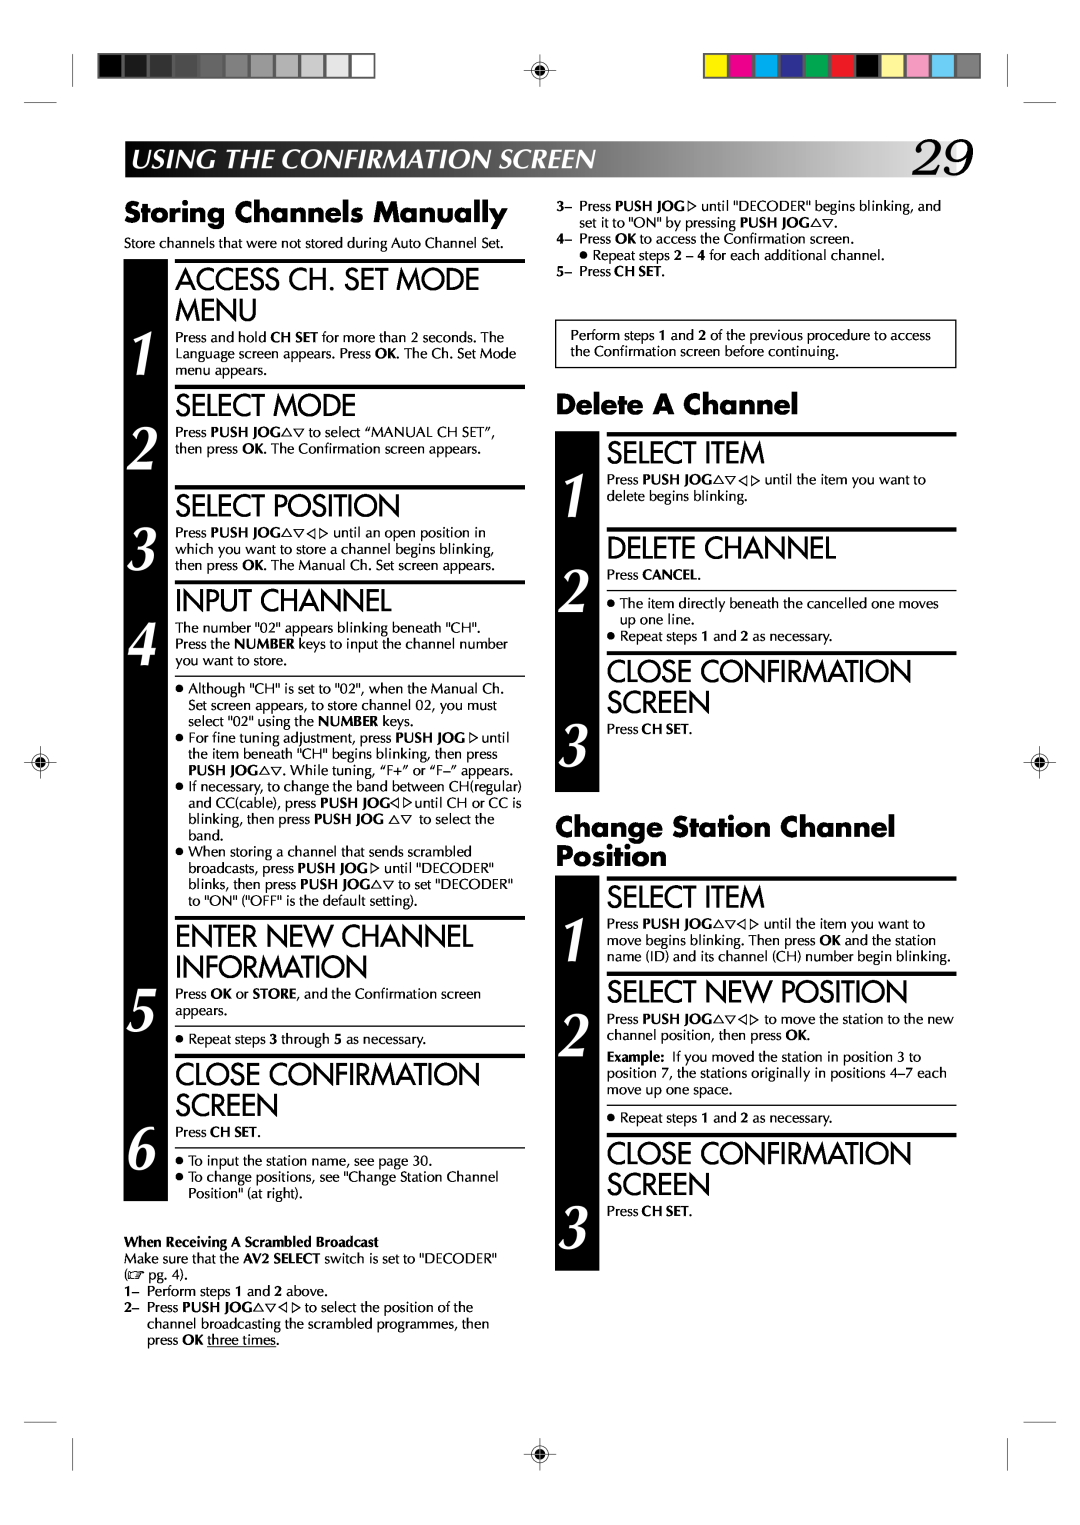 JVC HR-J238E USINGTHECONFIRMATIONSCREEN29, Storing Channels Manually, Delete A Channel, Change Station Channel Position 